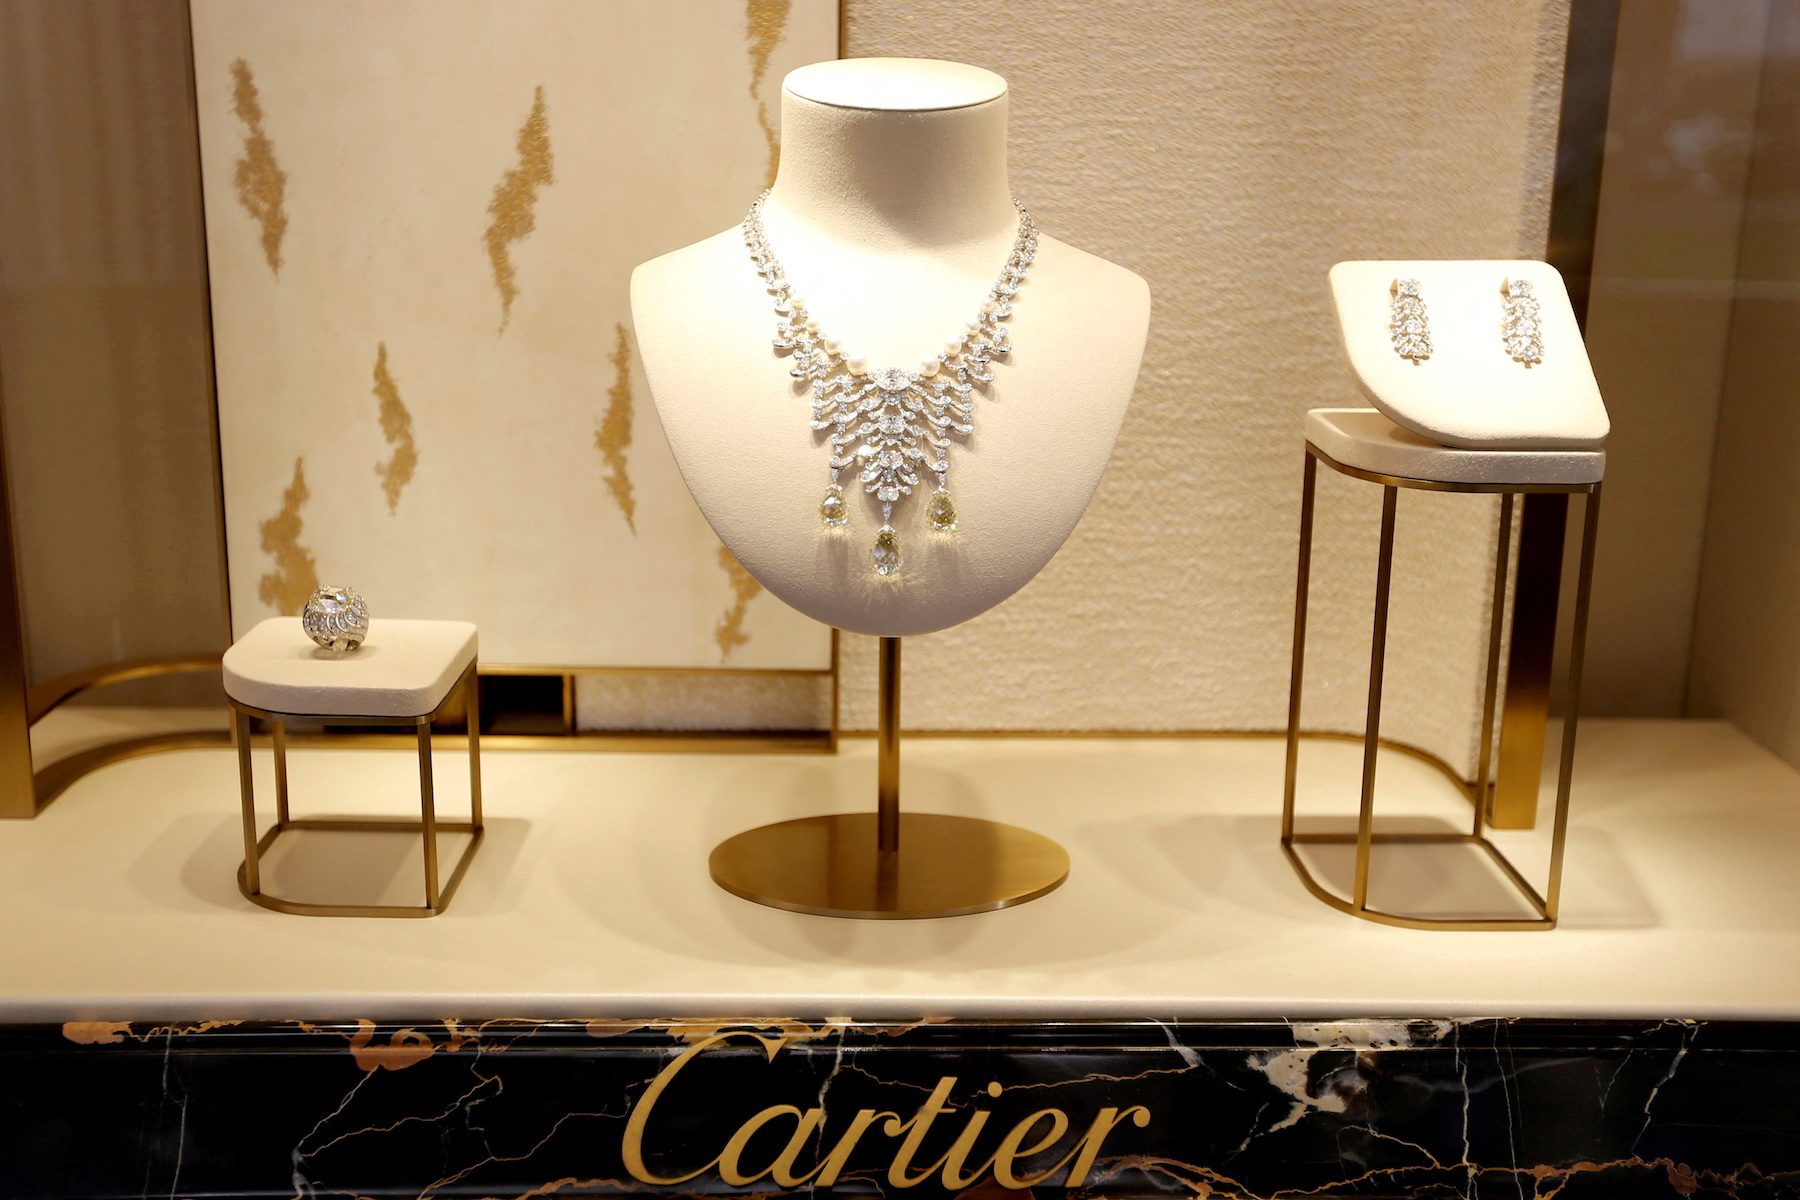 Cartier lawsuit accuses Tiffany of stealing luxury jewelry trade secrets